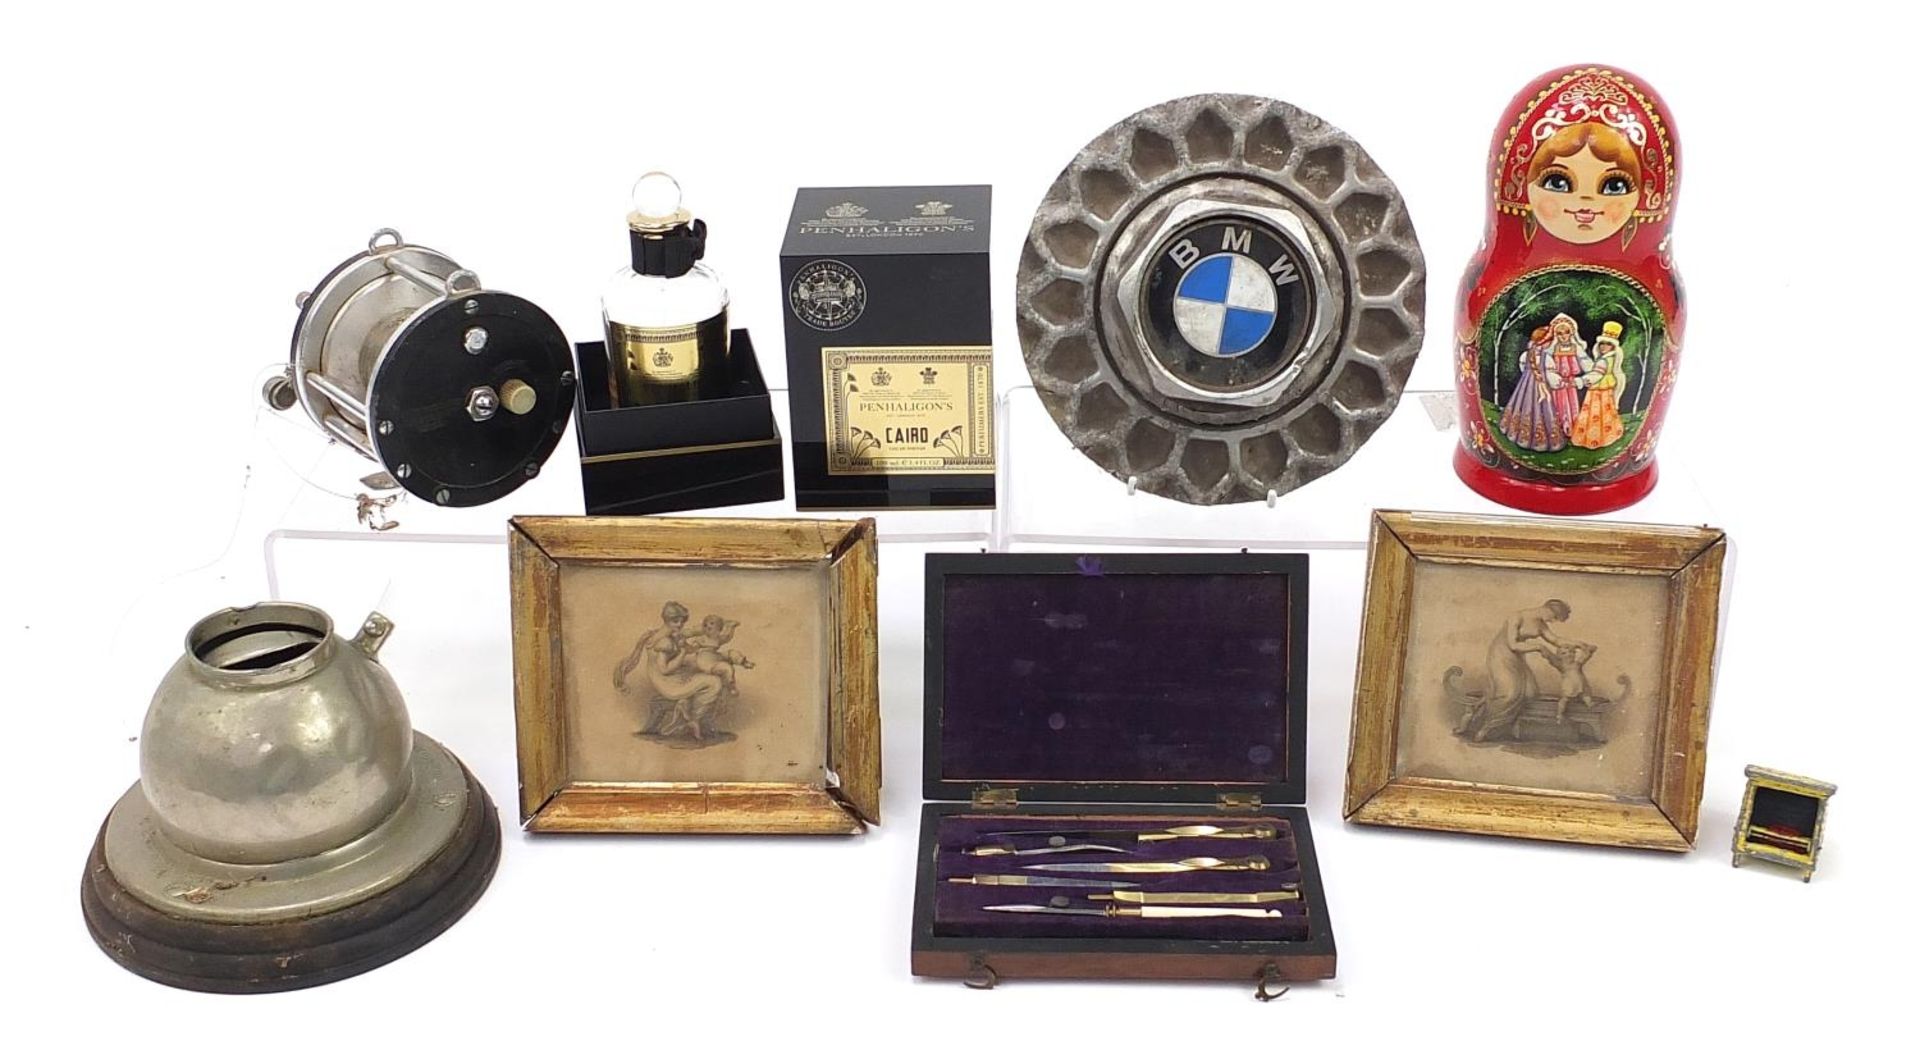 Sundry items including set of Russian stacking dolls, vintage fishing reel and BMW vehicle hub cap